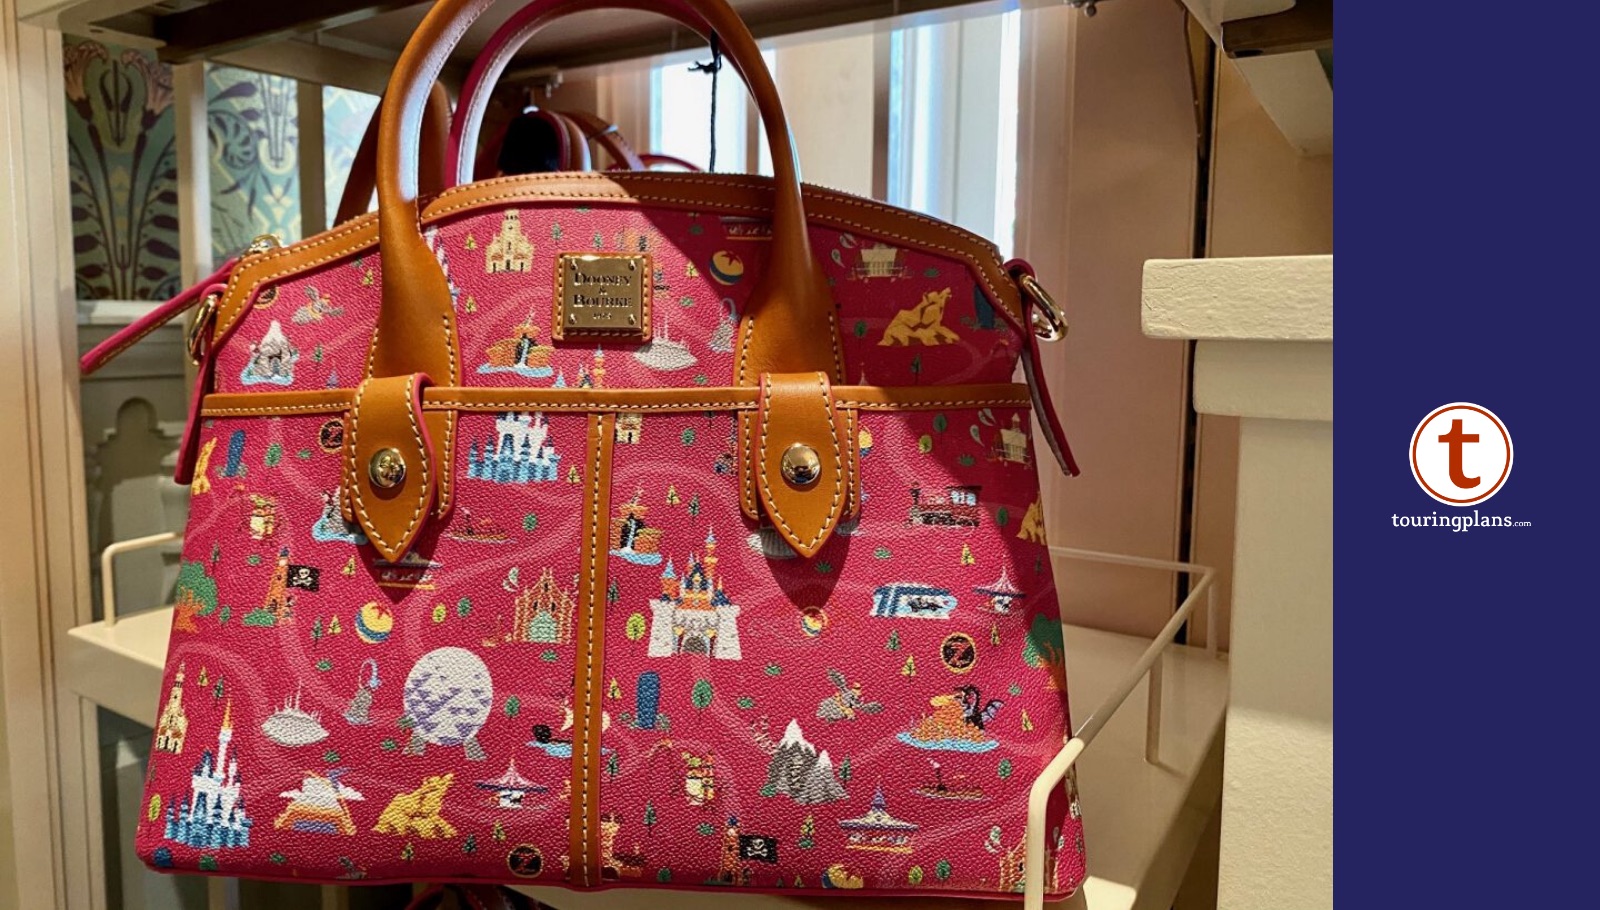 Pretty in Pink! The NEW Disney Park Life Dooney & Bourke Collection Has  Arrived in Disney World!